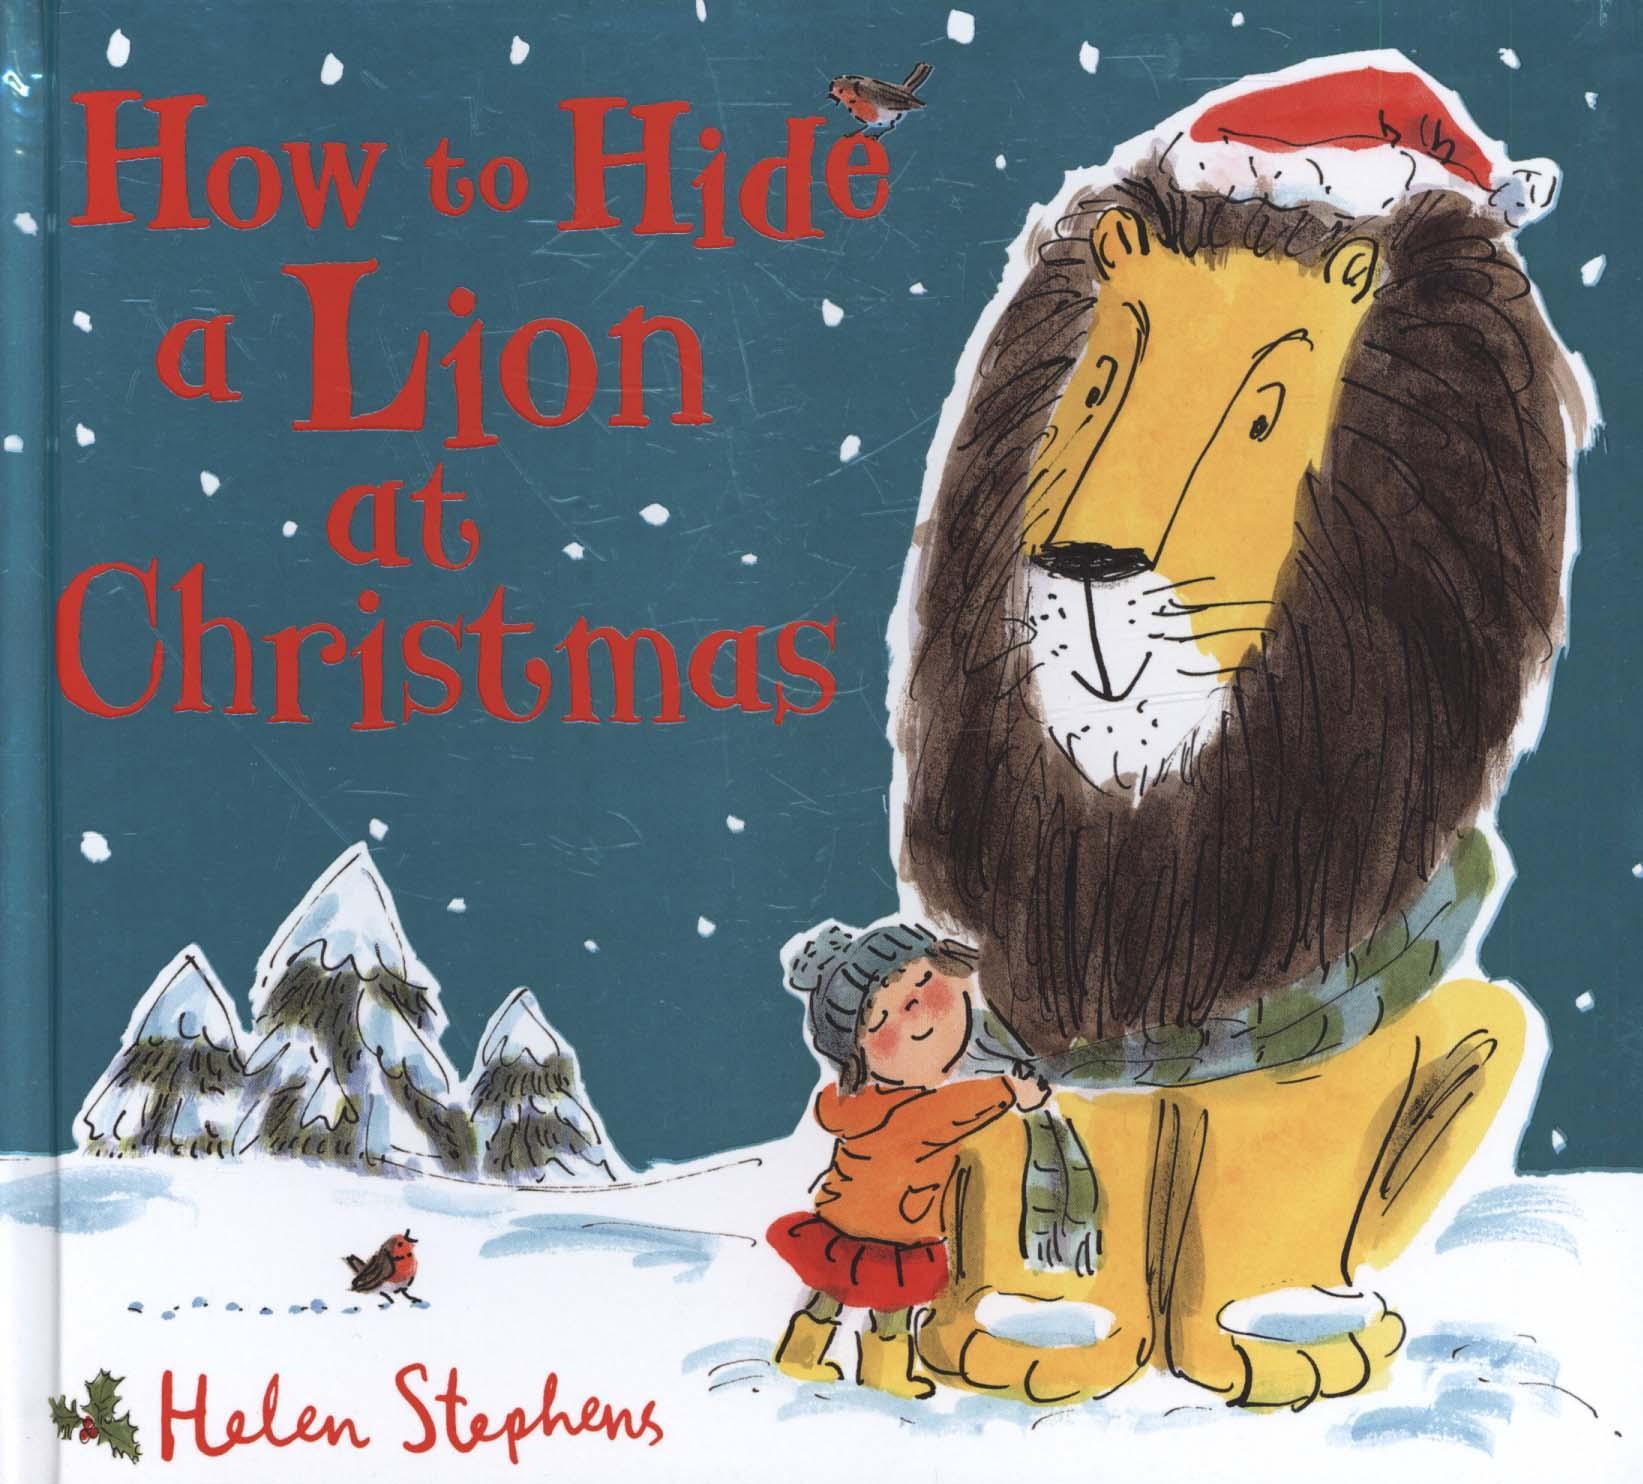 How to Hide a Lion at Christmas - Helen Stephens